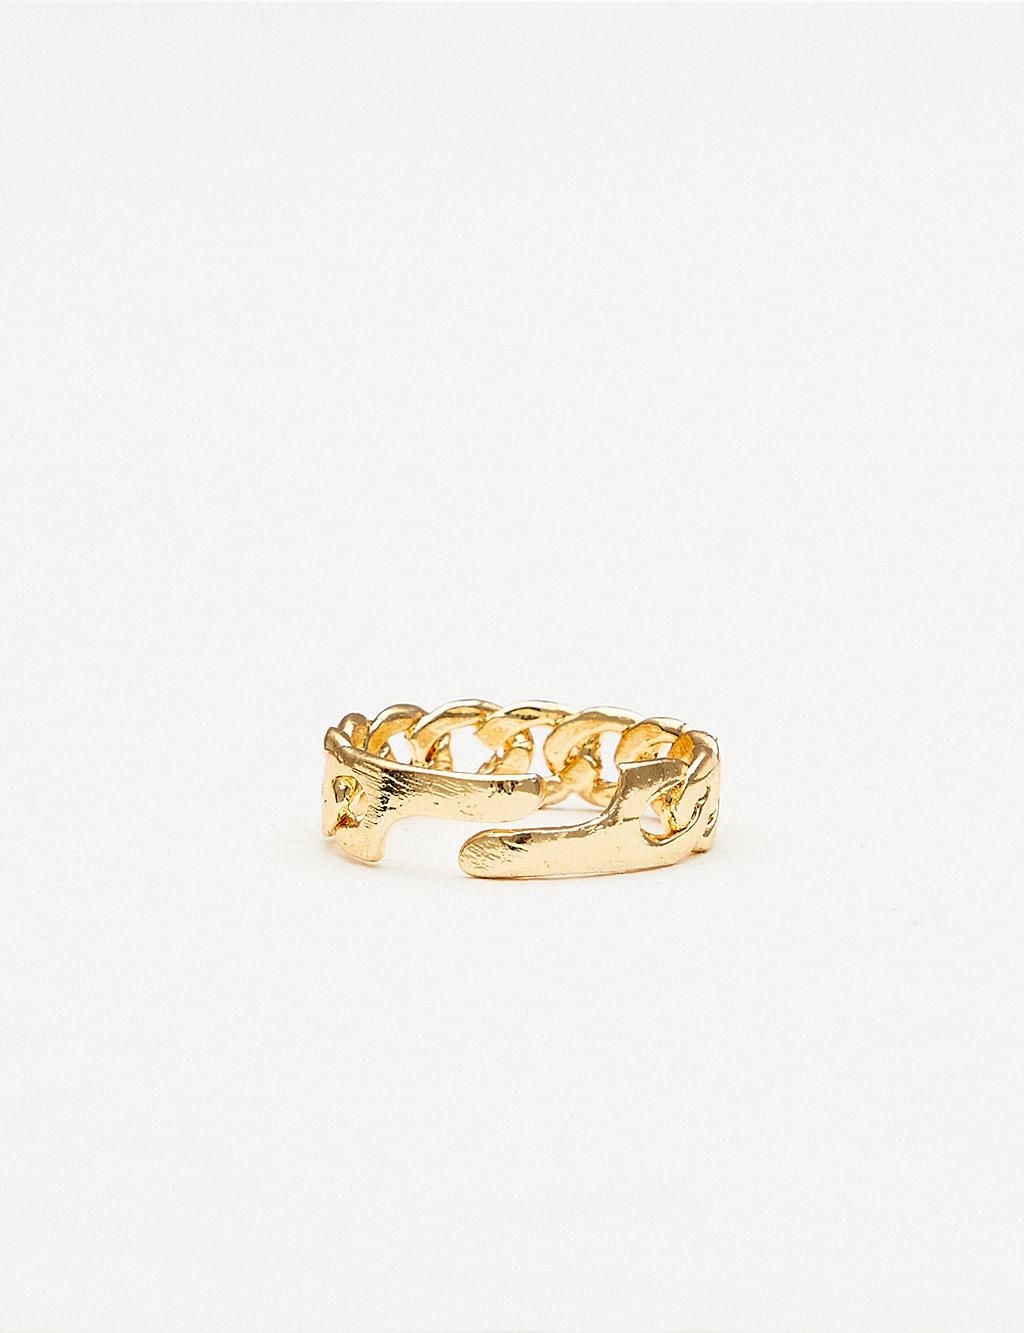 Adjustable Knit Chain Ring Gold Color